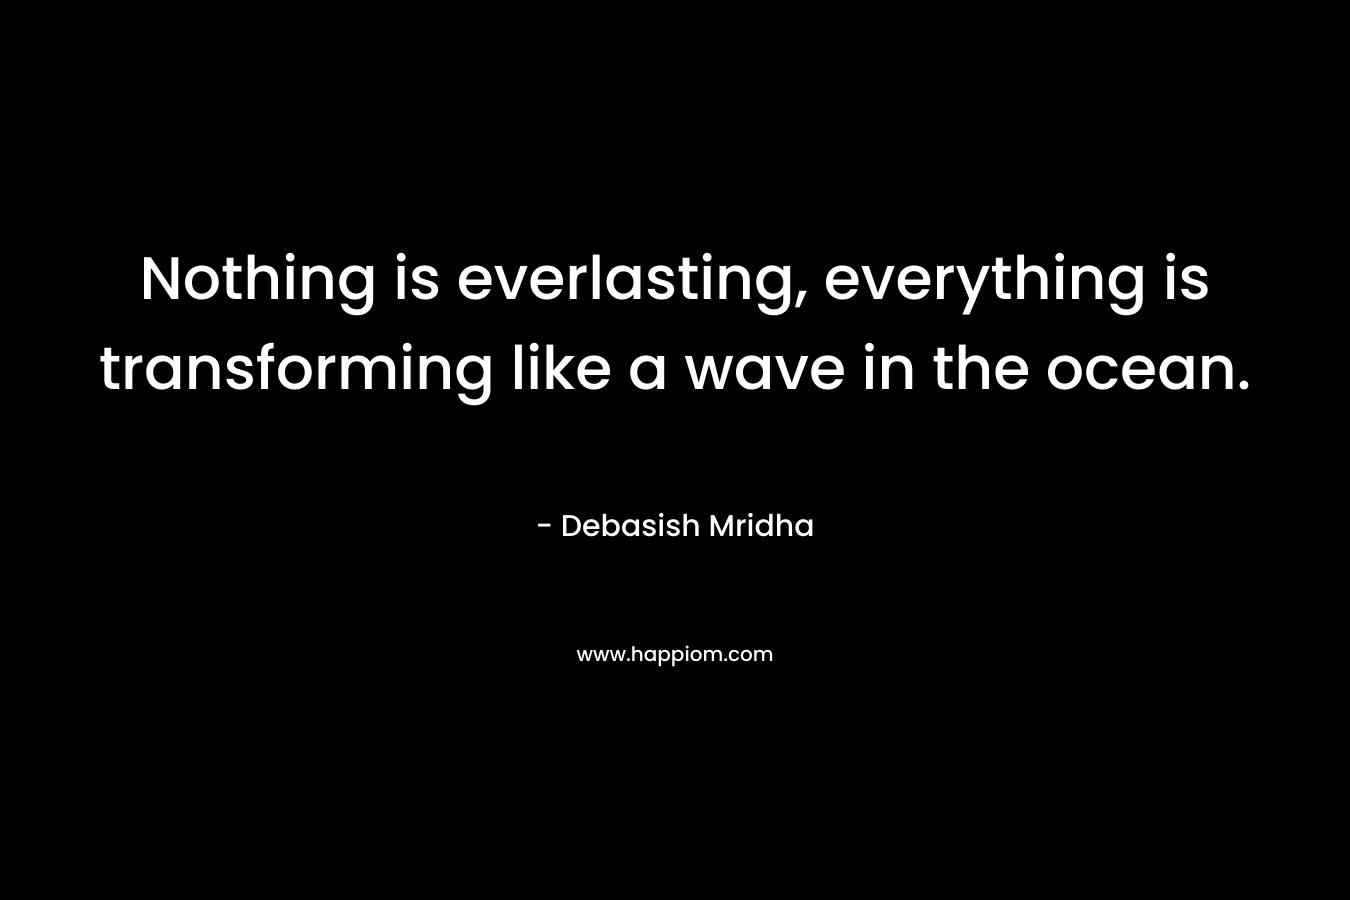 Nothing is everlasting, everything is transforming like a wave in the ocean.